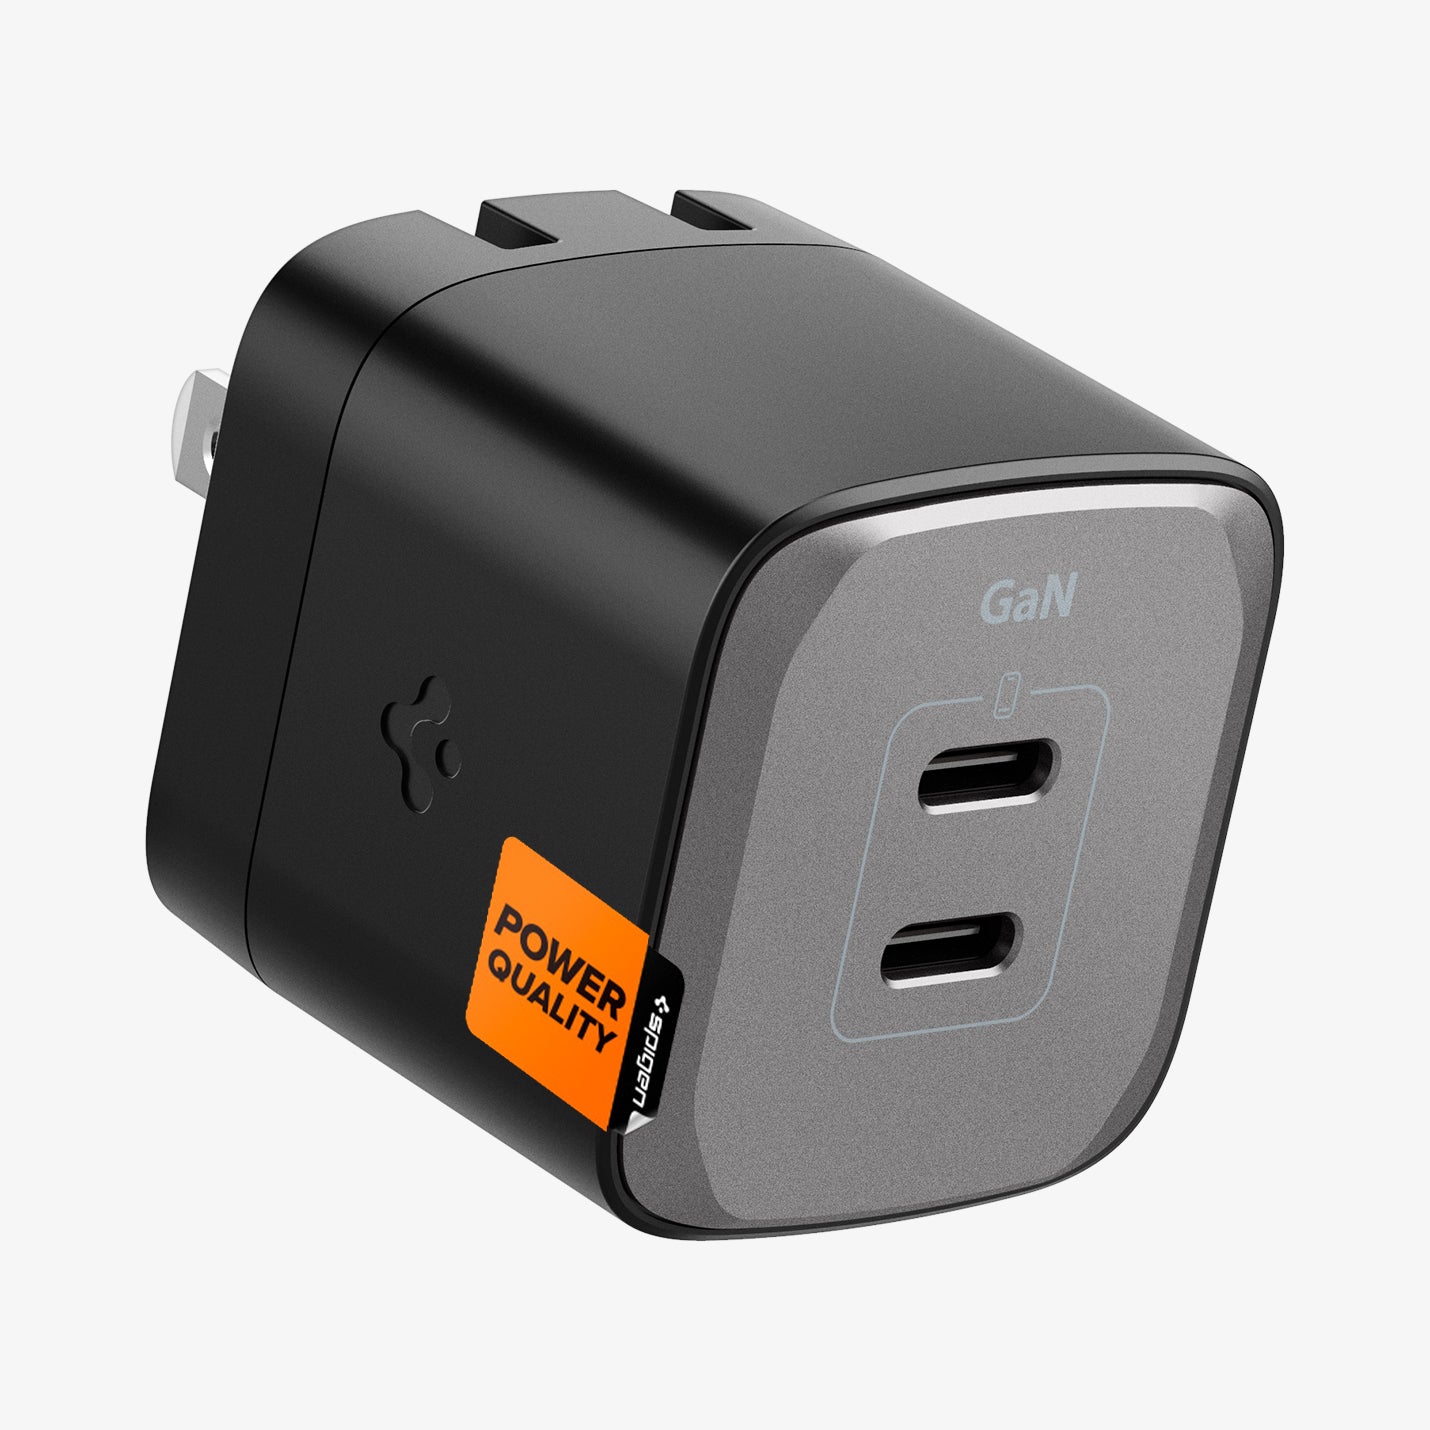 ACH05142 - ArcStation™ Pro GaN 352 Dual USB-C Wall Charger PE2202 in midnight black showing the back, side and top